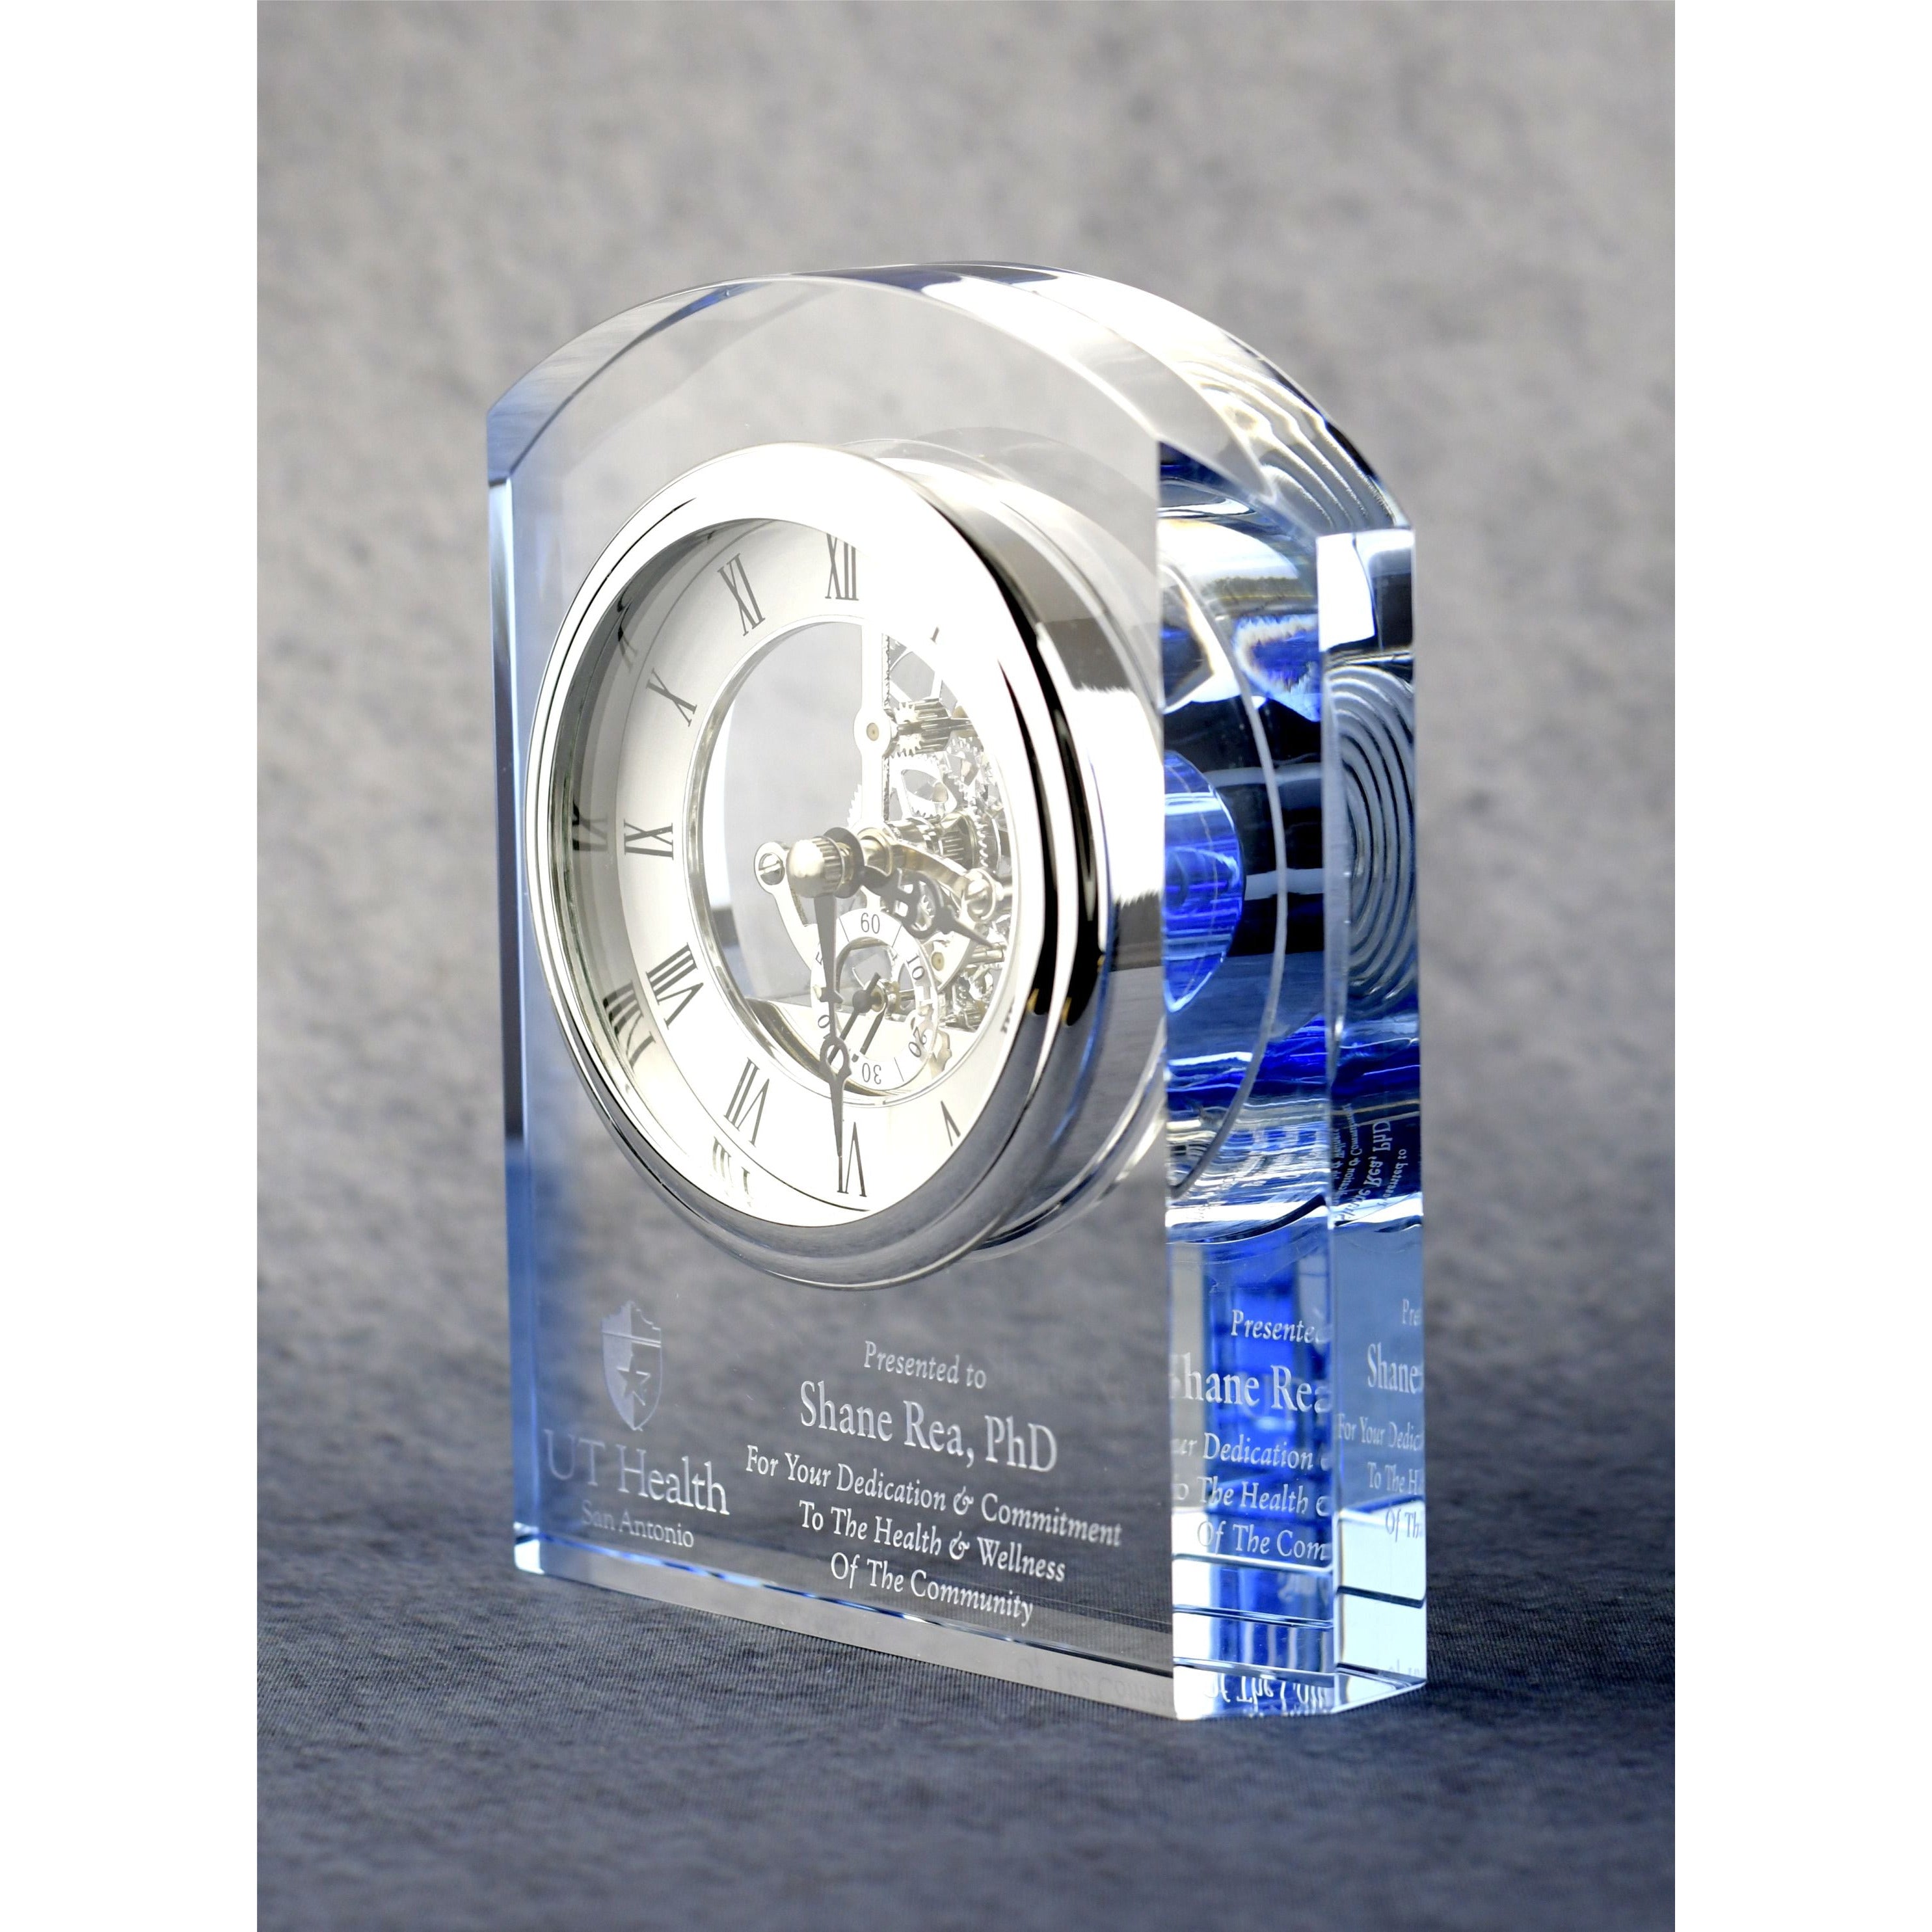 Crystal Clock With Blue Accents | Alliance Awards LLC.